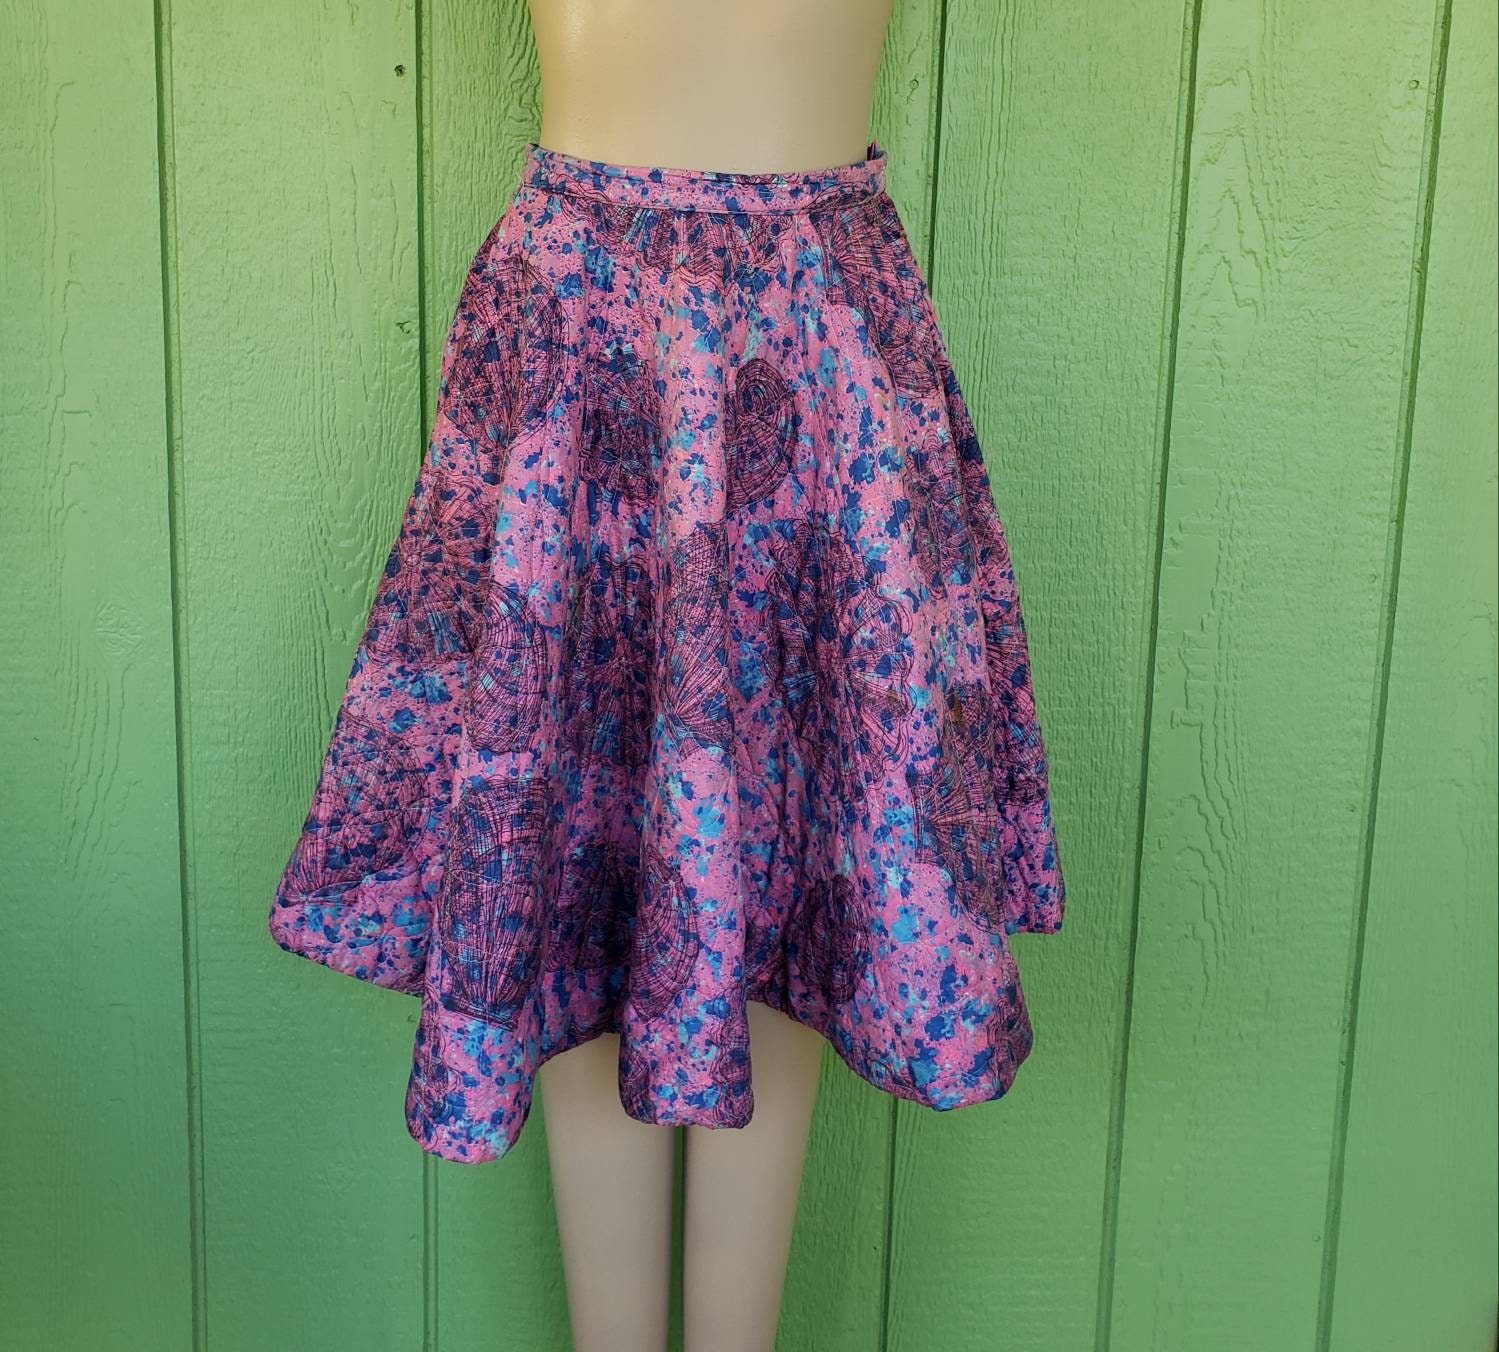 Quilted Circle Skirt - Etsy